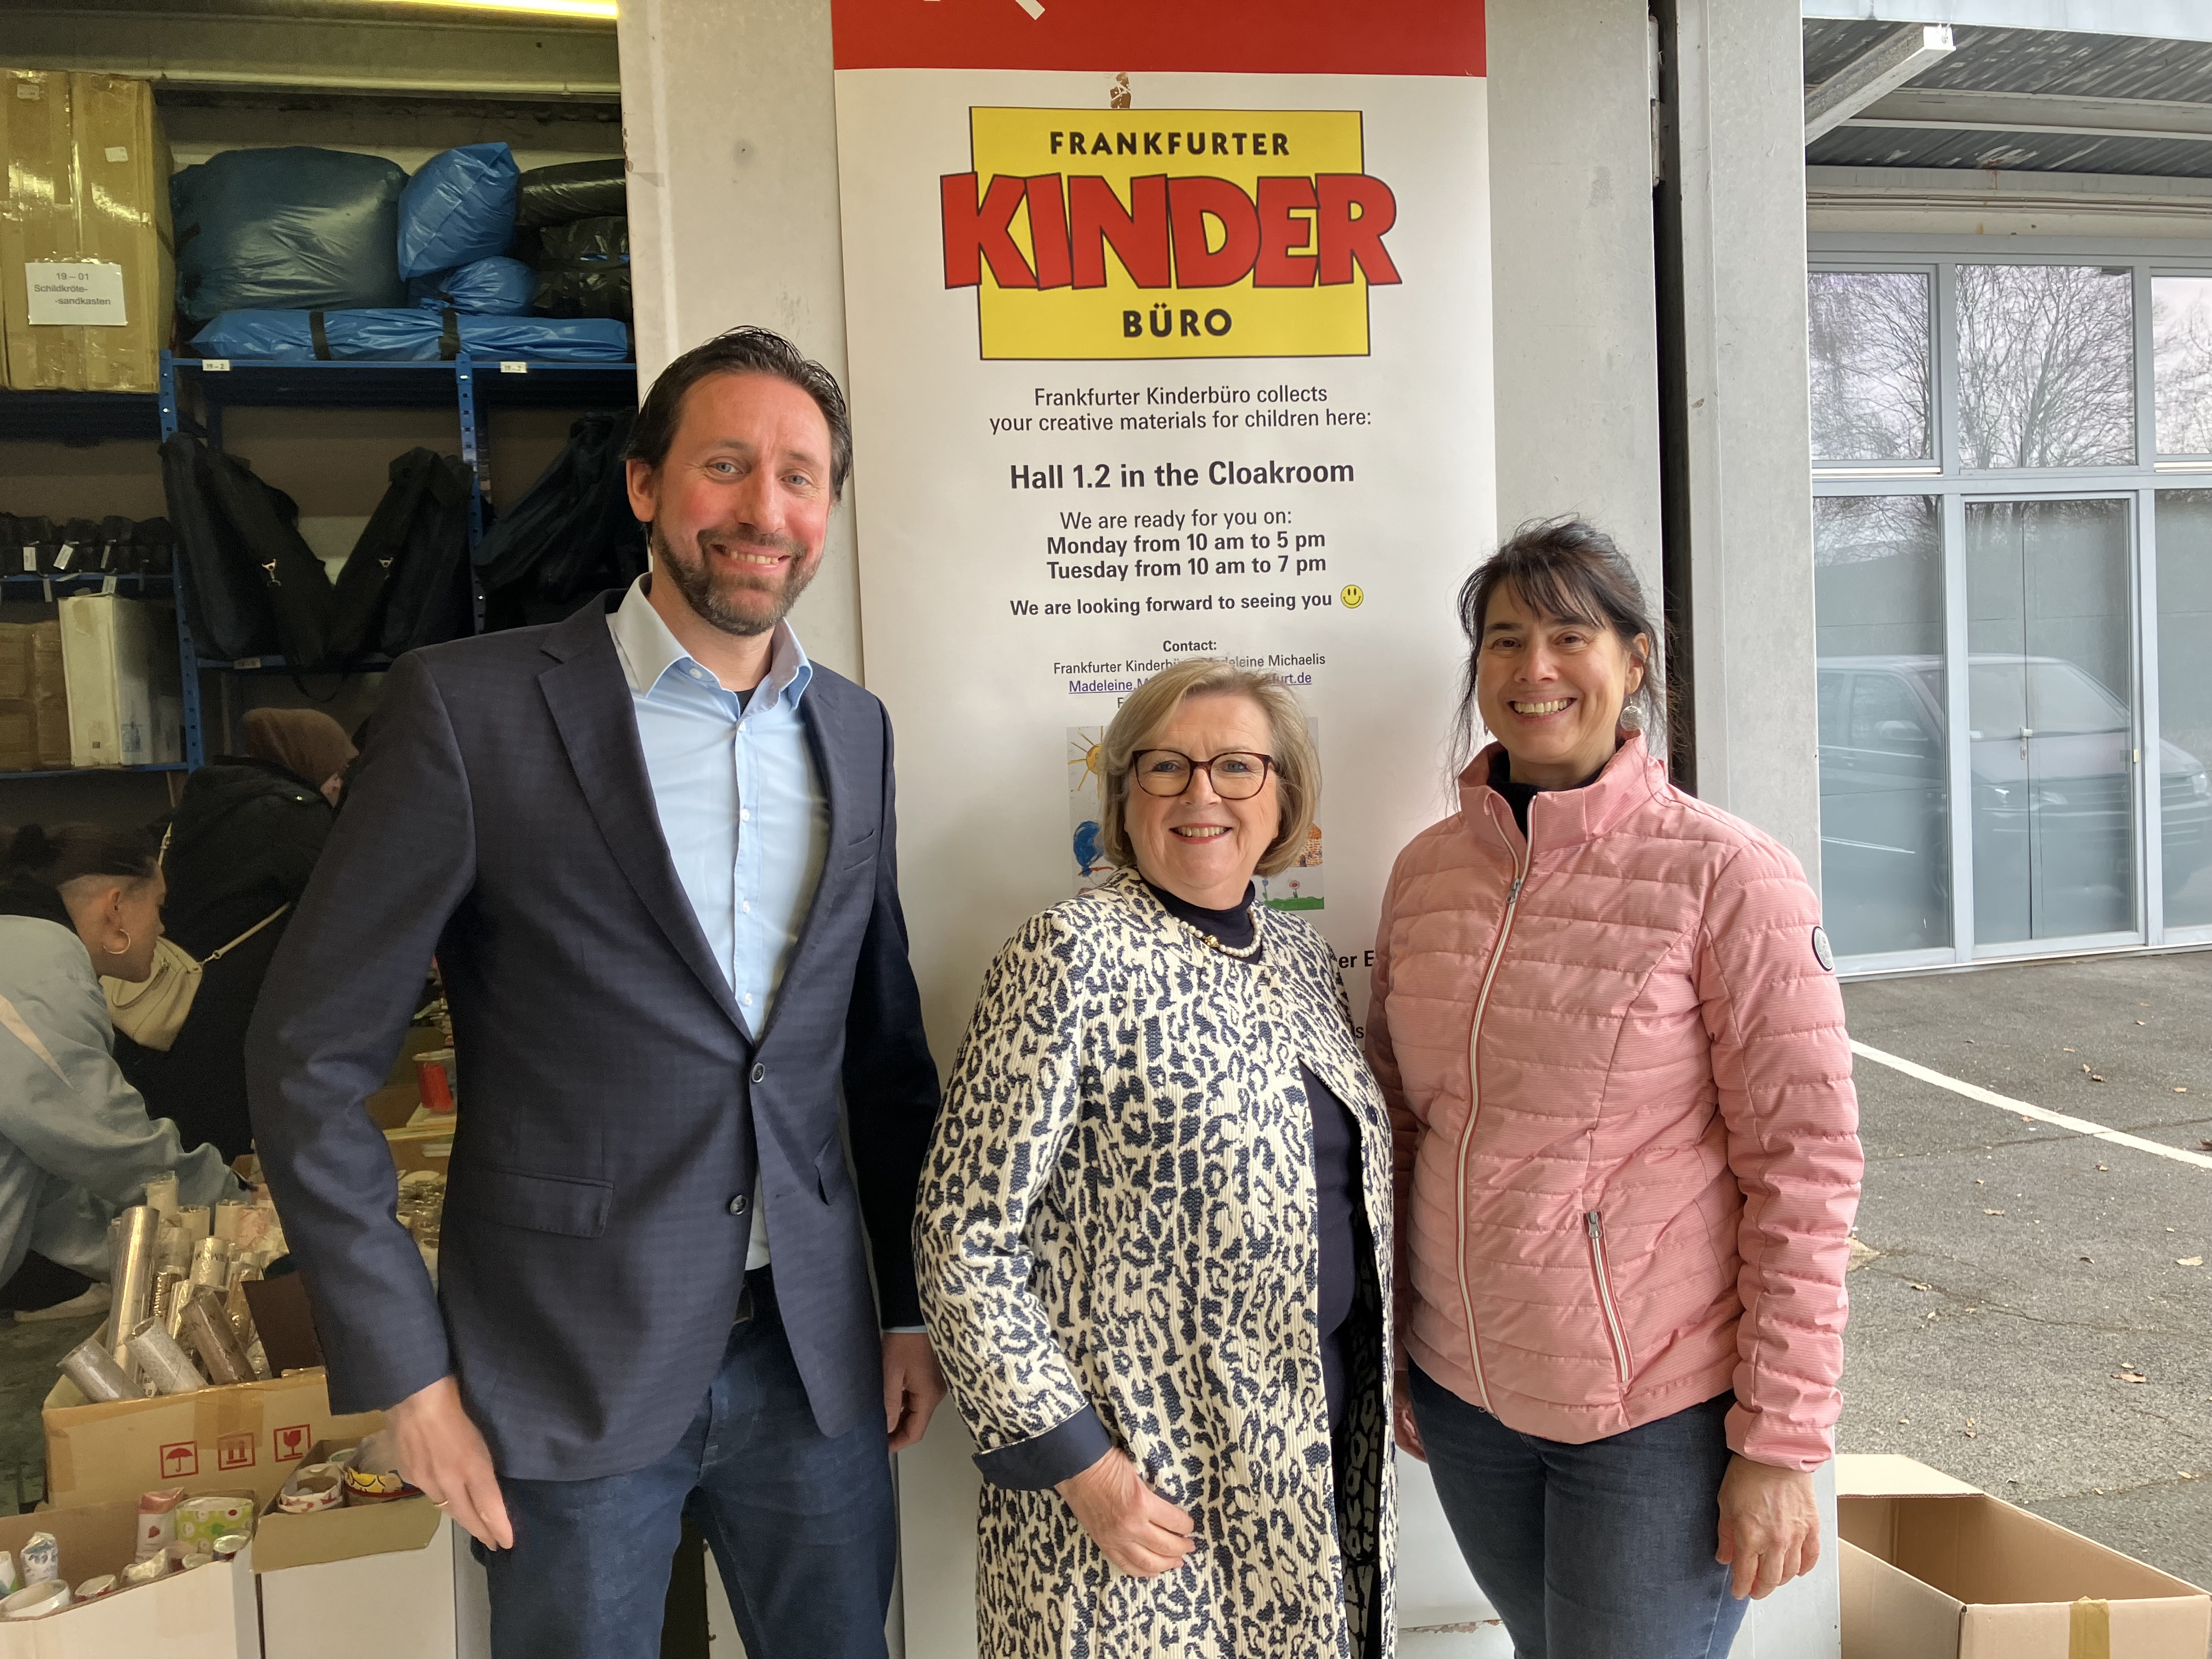 (From left to right:) Christopher Huth and Eva Olbrich of the Creativeworld team hand over the creative art supplies donated by Creativeworld exhibitors to Madeleine Michaelis of the Frankfurter Kinderbüro